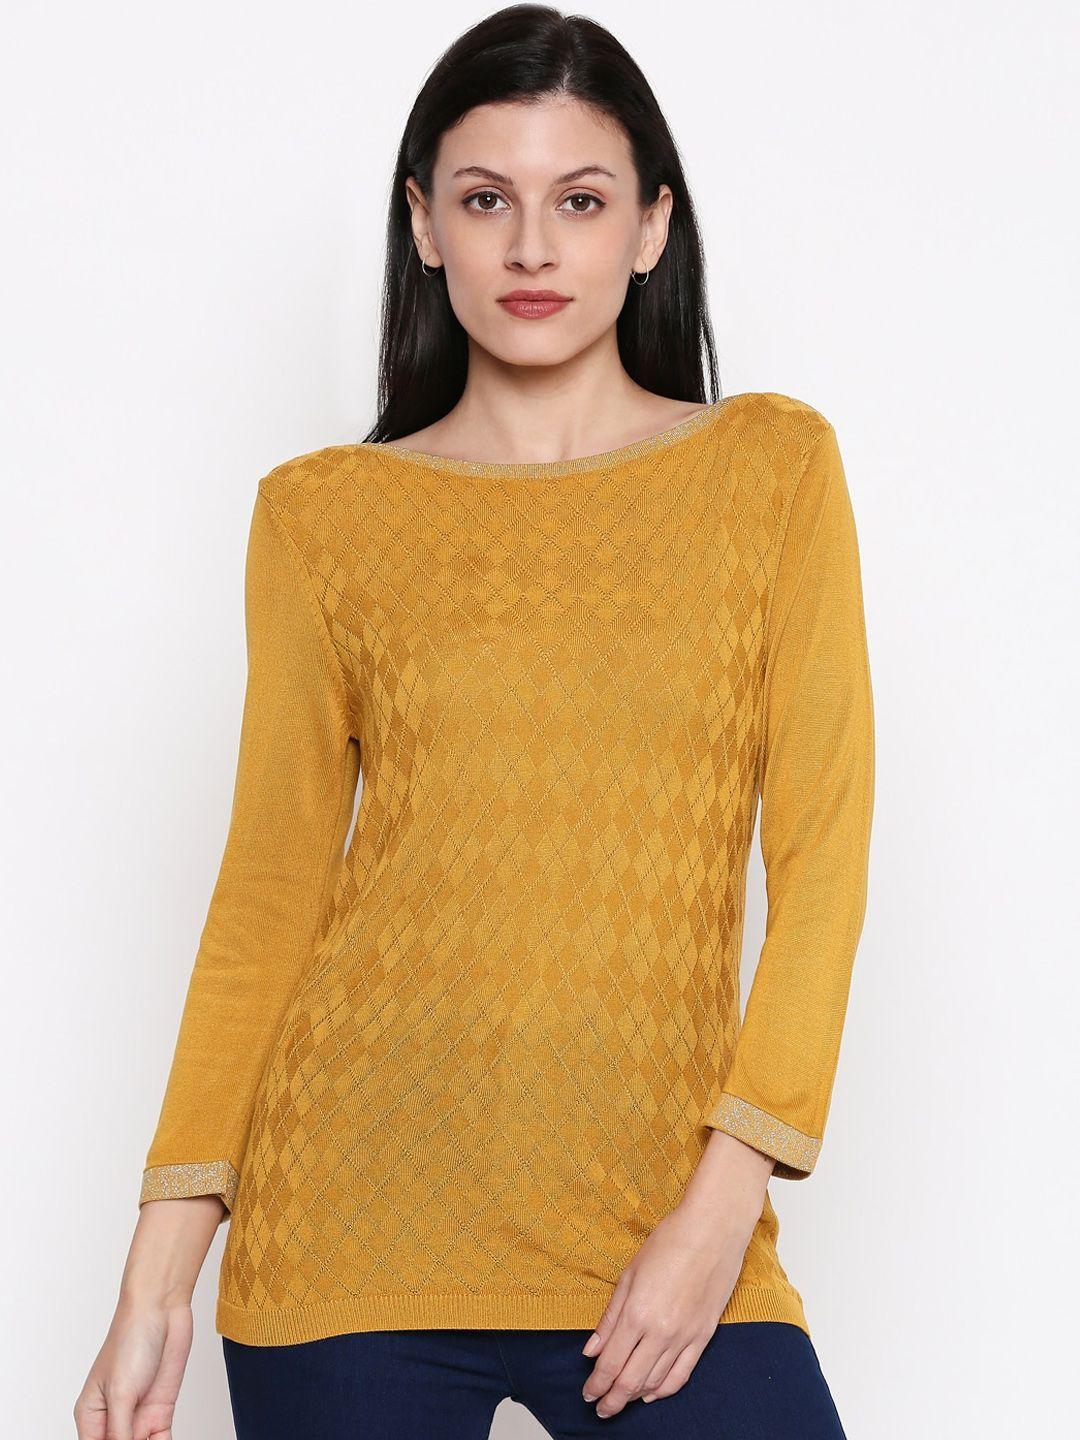 annabelle by pantaloons women mustard yellow self design pullover sweater